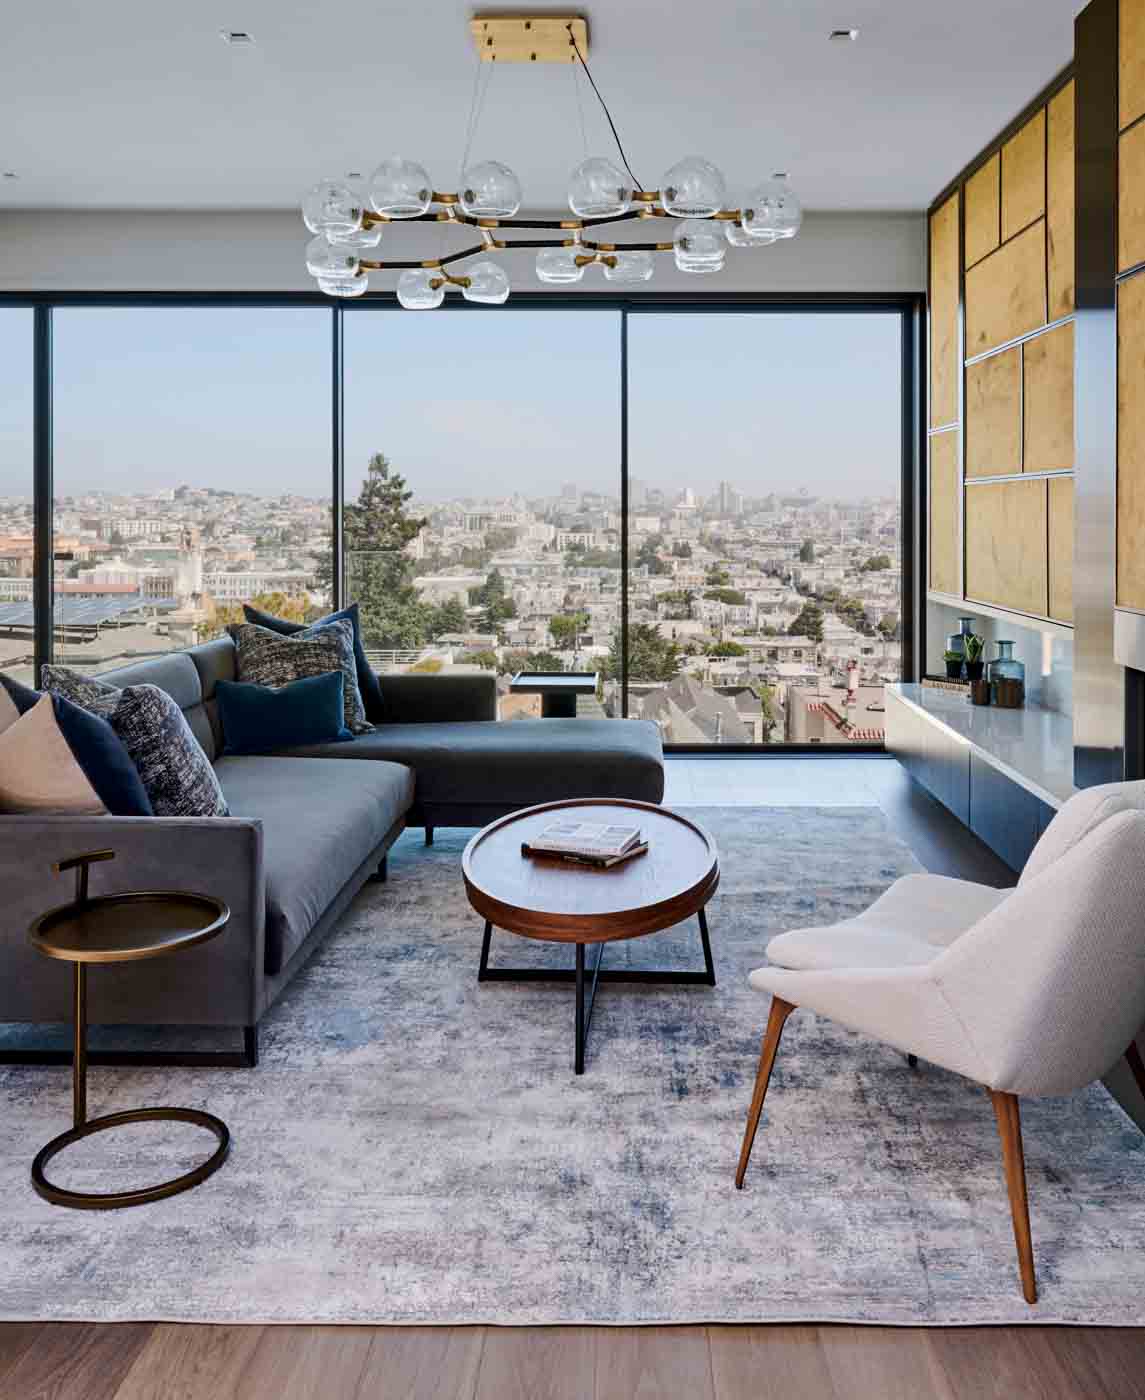 106 Sr2023 03 162 Living Room With Floor To Ceiling Windows Granting A 180 Degree View Of San Francisco